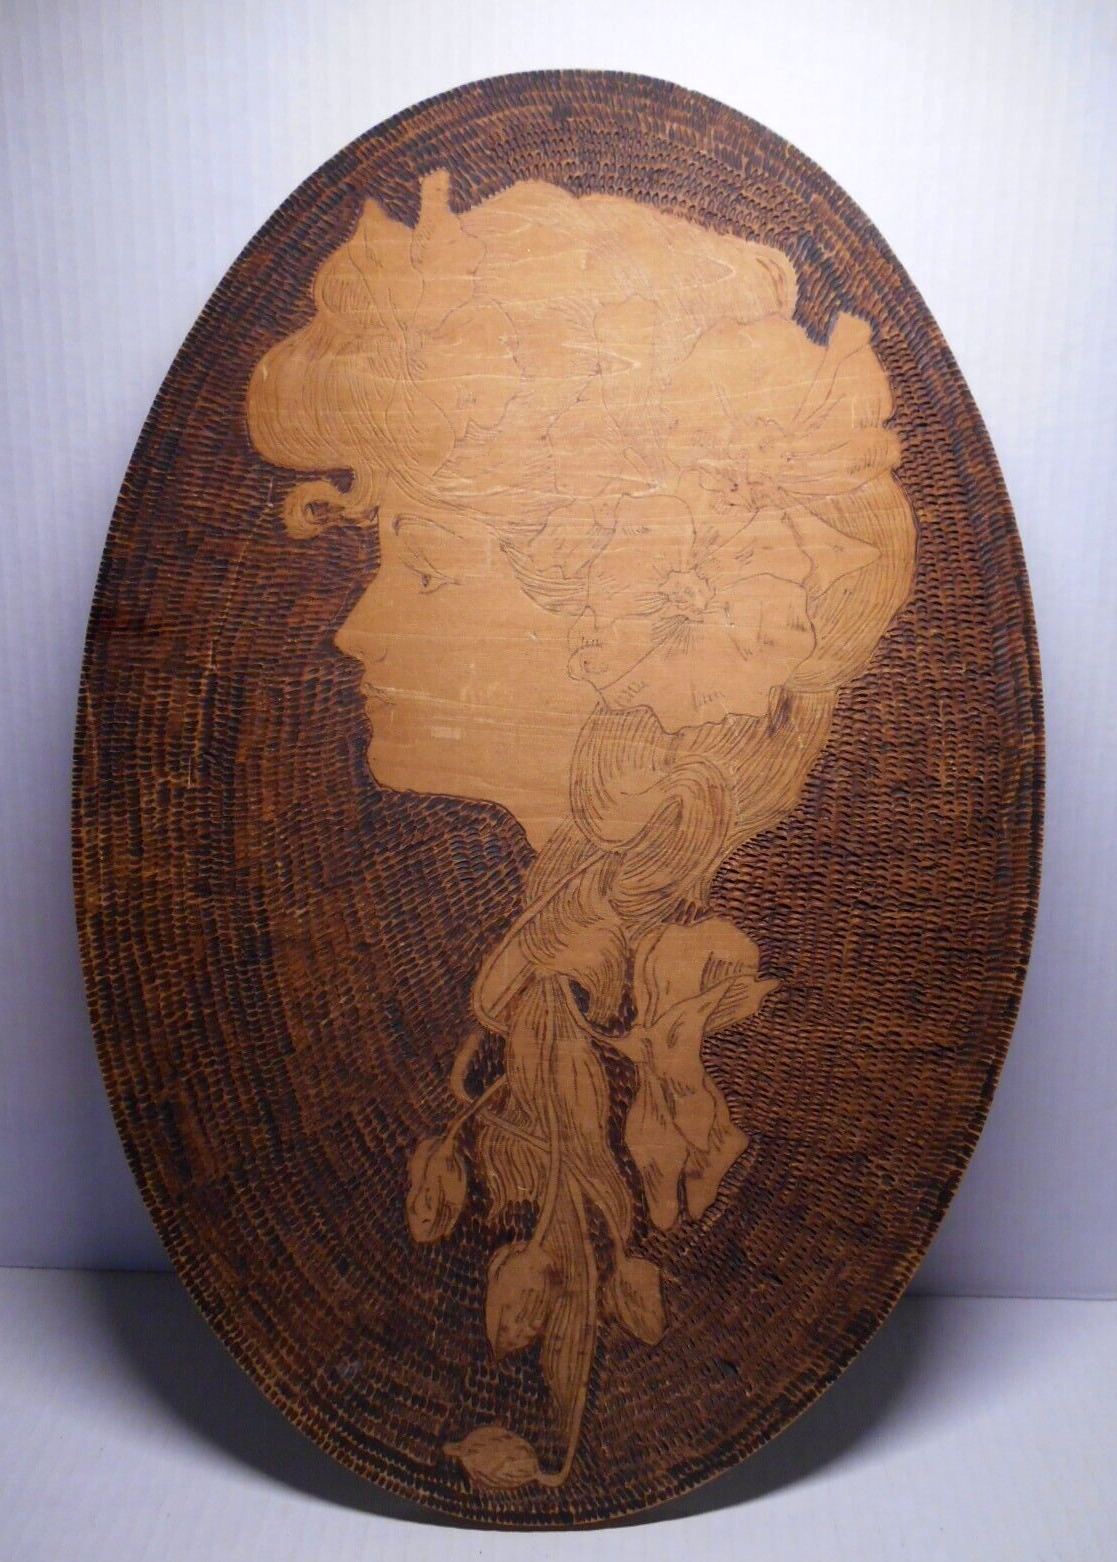 Antique 1910 Pyrography GIBSON GIRL FLEMISH ART Nouveau Wooden Oval Wall Plaque